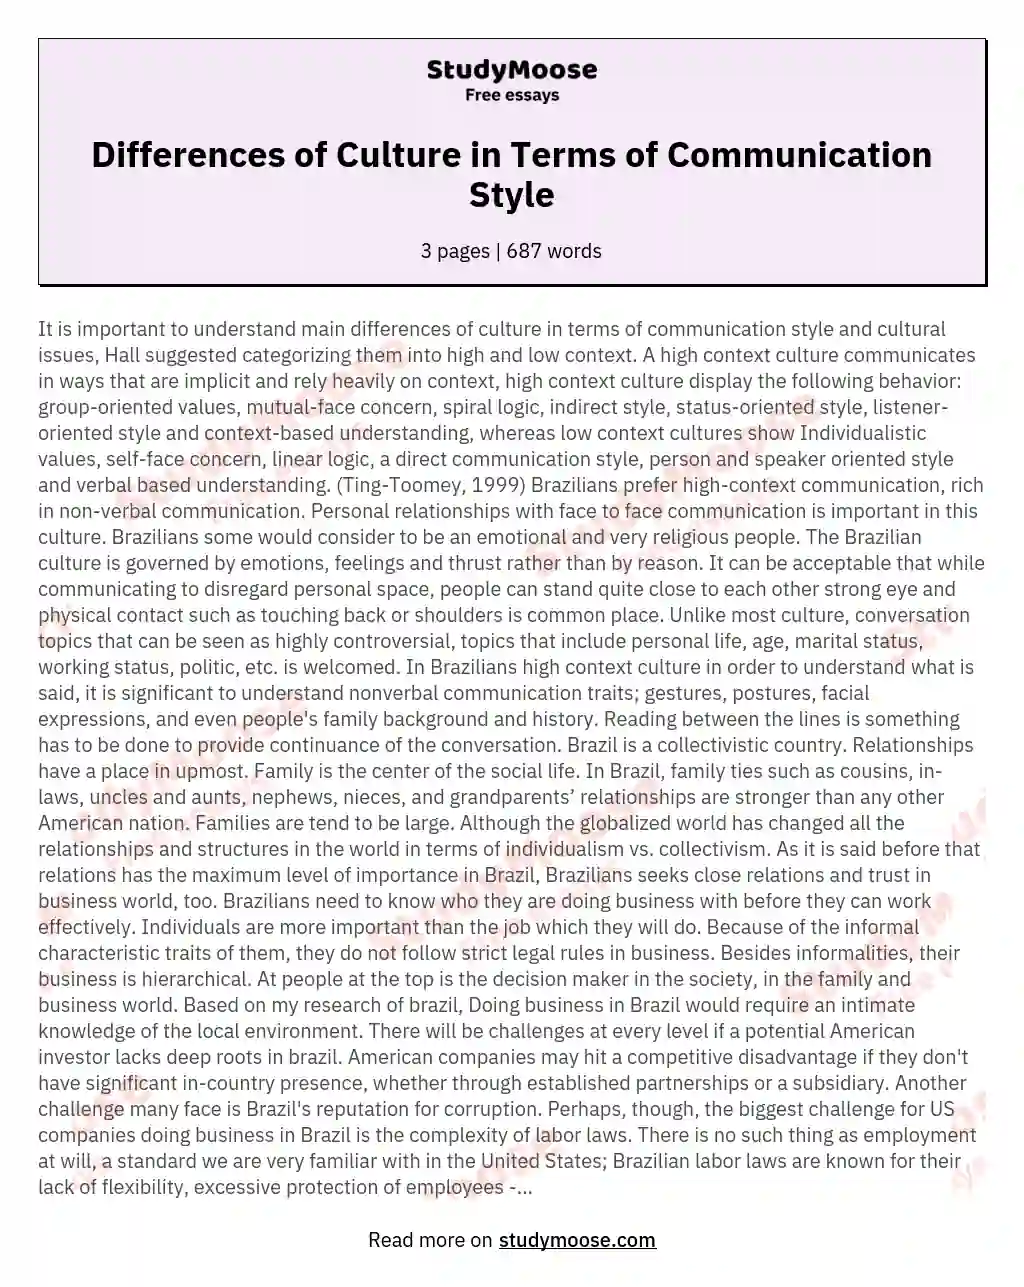 Differences of Culture in Terms of Communication Style essay